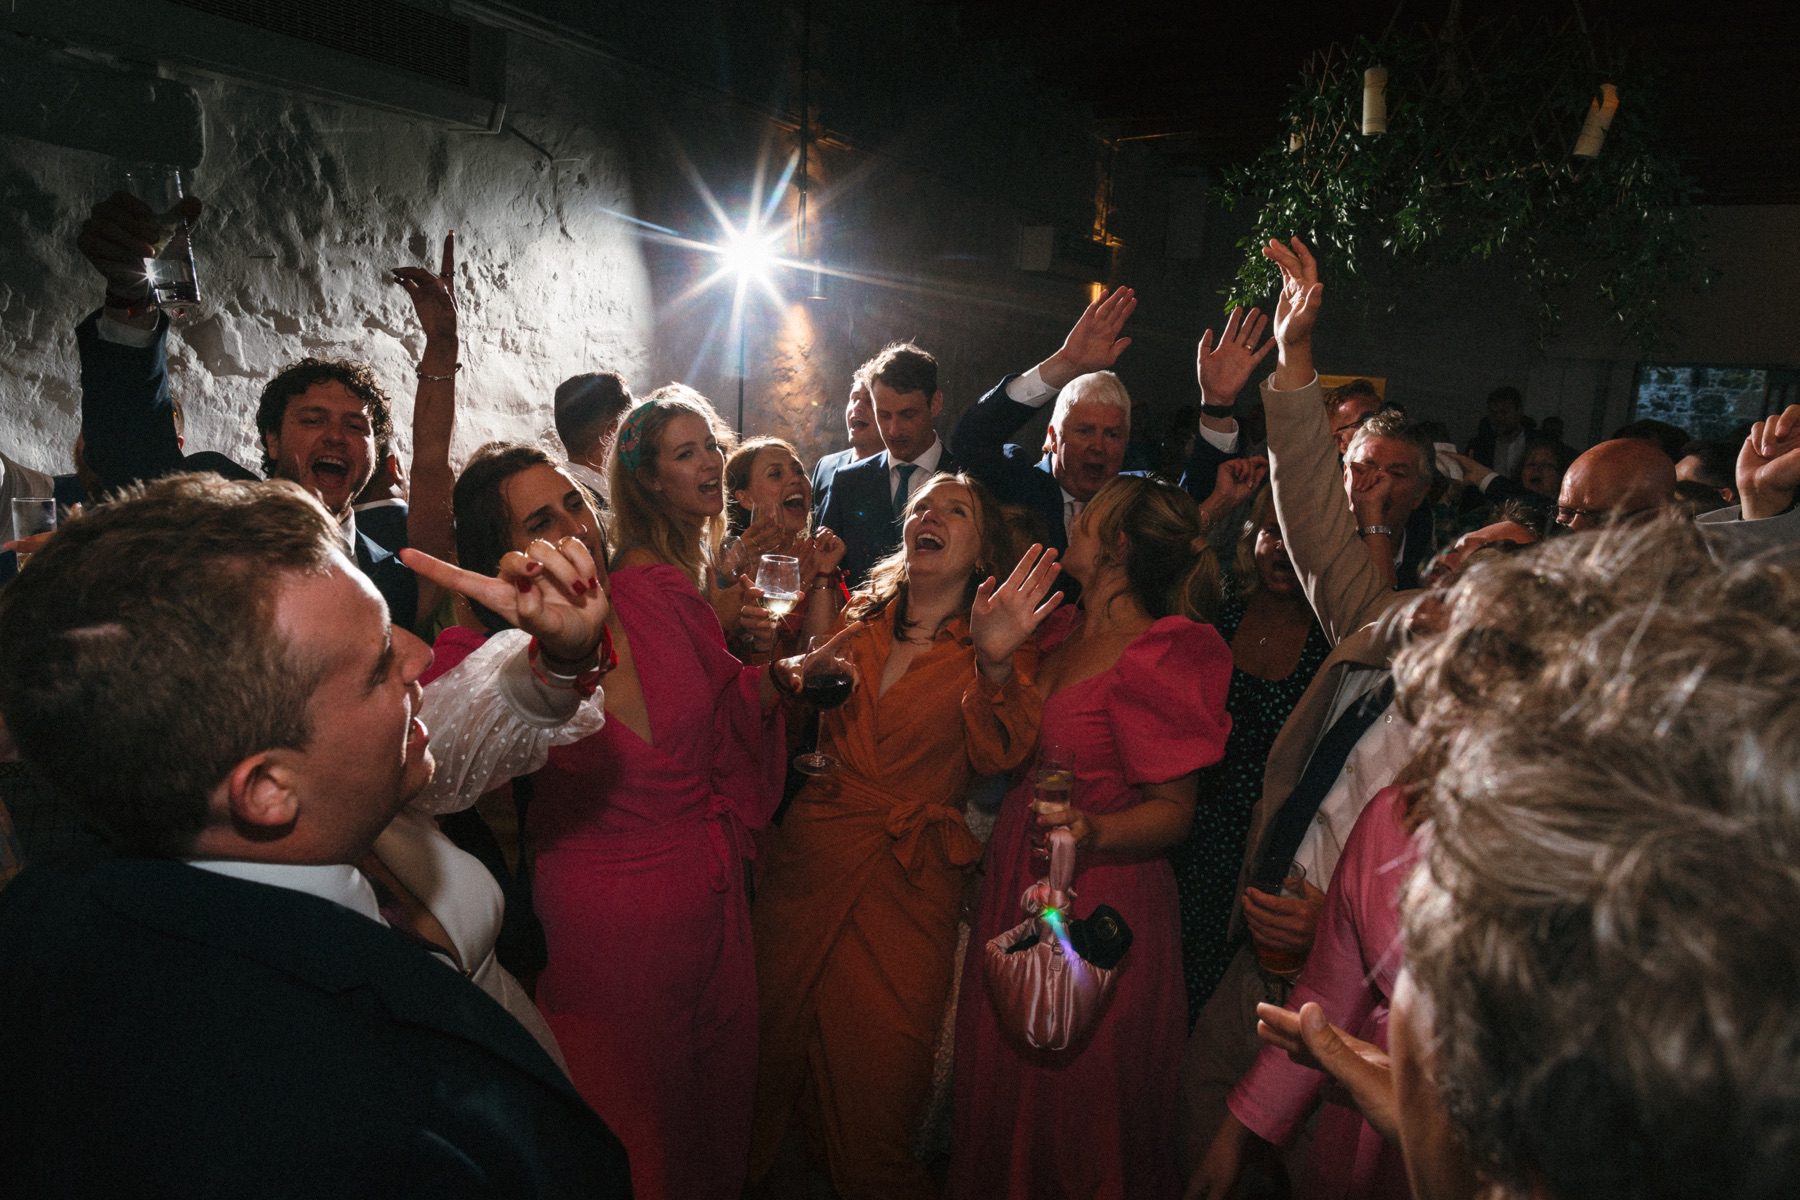 Get great party photos with Freckle Photography_Wedding Photographer Devon & Cornwall